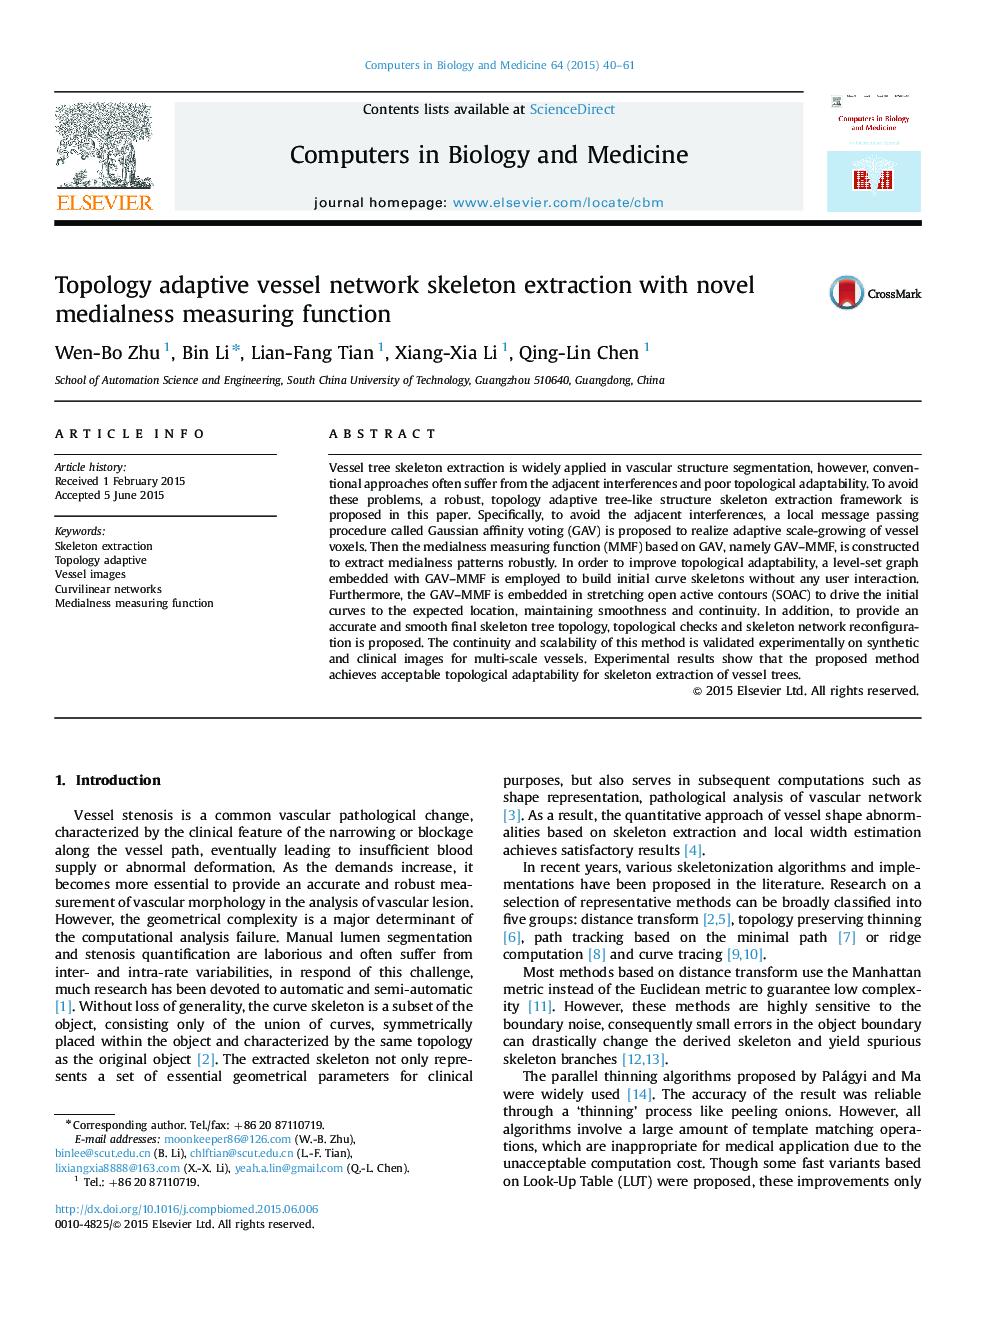 Topology adaptive vessel network skeleton extraction with novel medialness measuring function